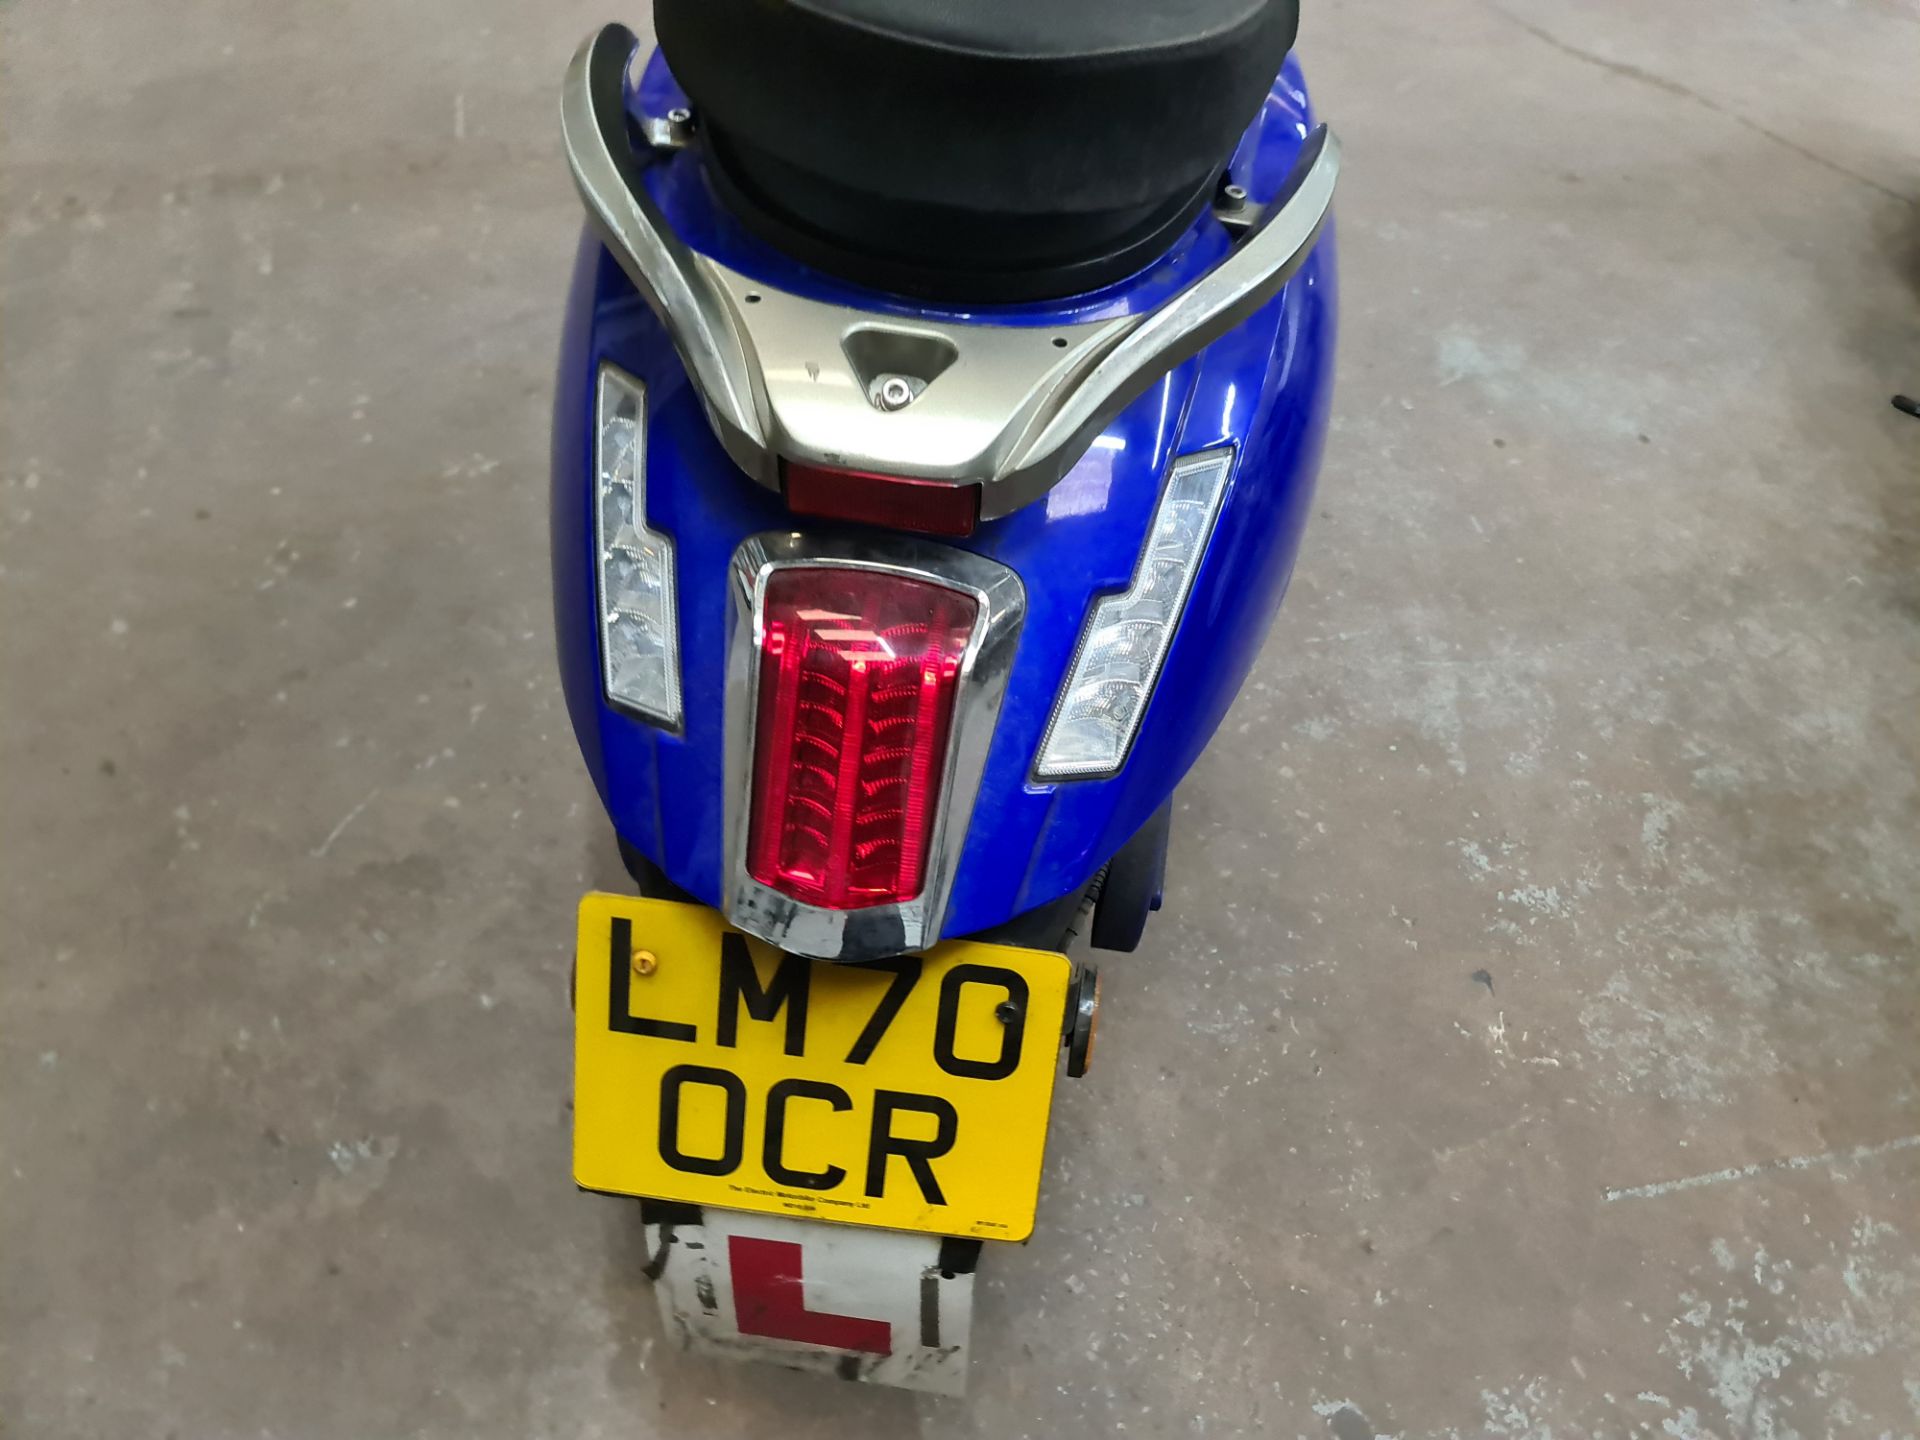 LM70 OCR Ultra 4000 electric scooter, non-runner, Colour: blue, 125cc equivalent, 50mph top speed, 5 - Image 15 of 25